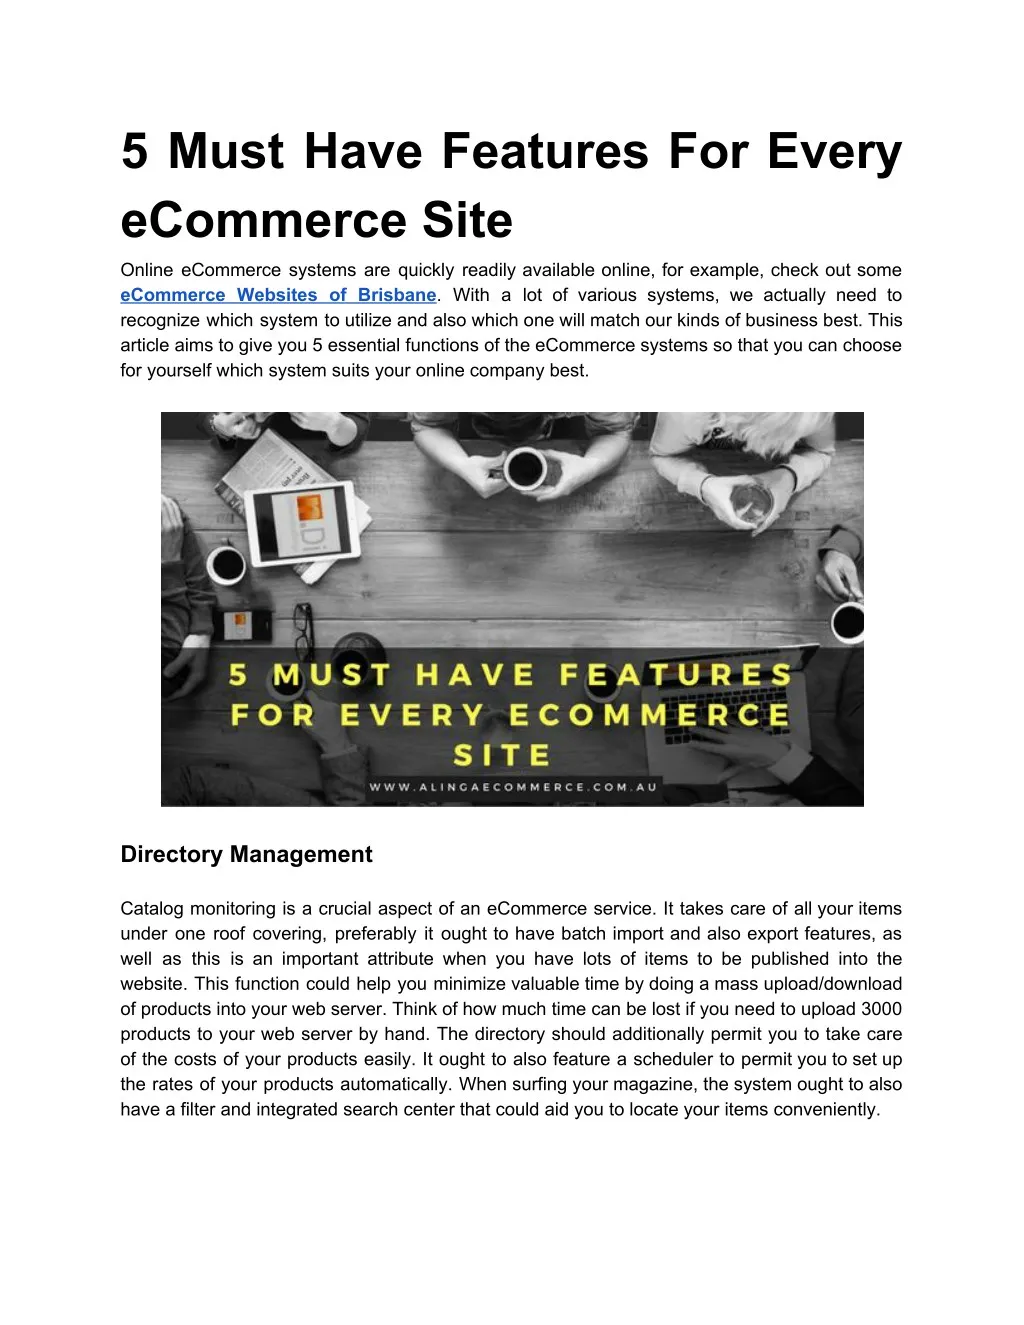 5 must have features for every ecommerce site